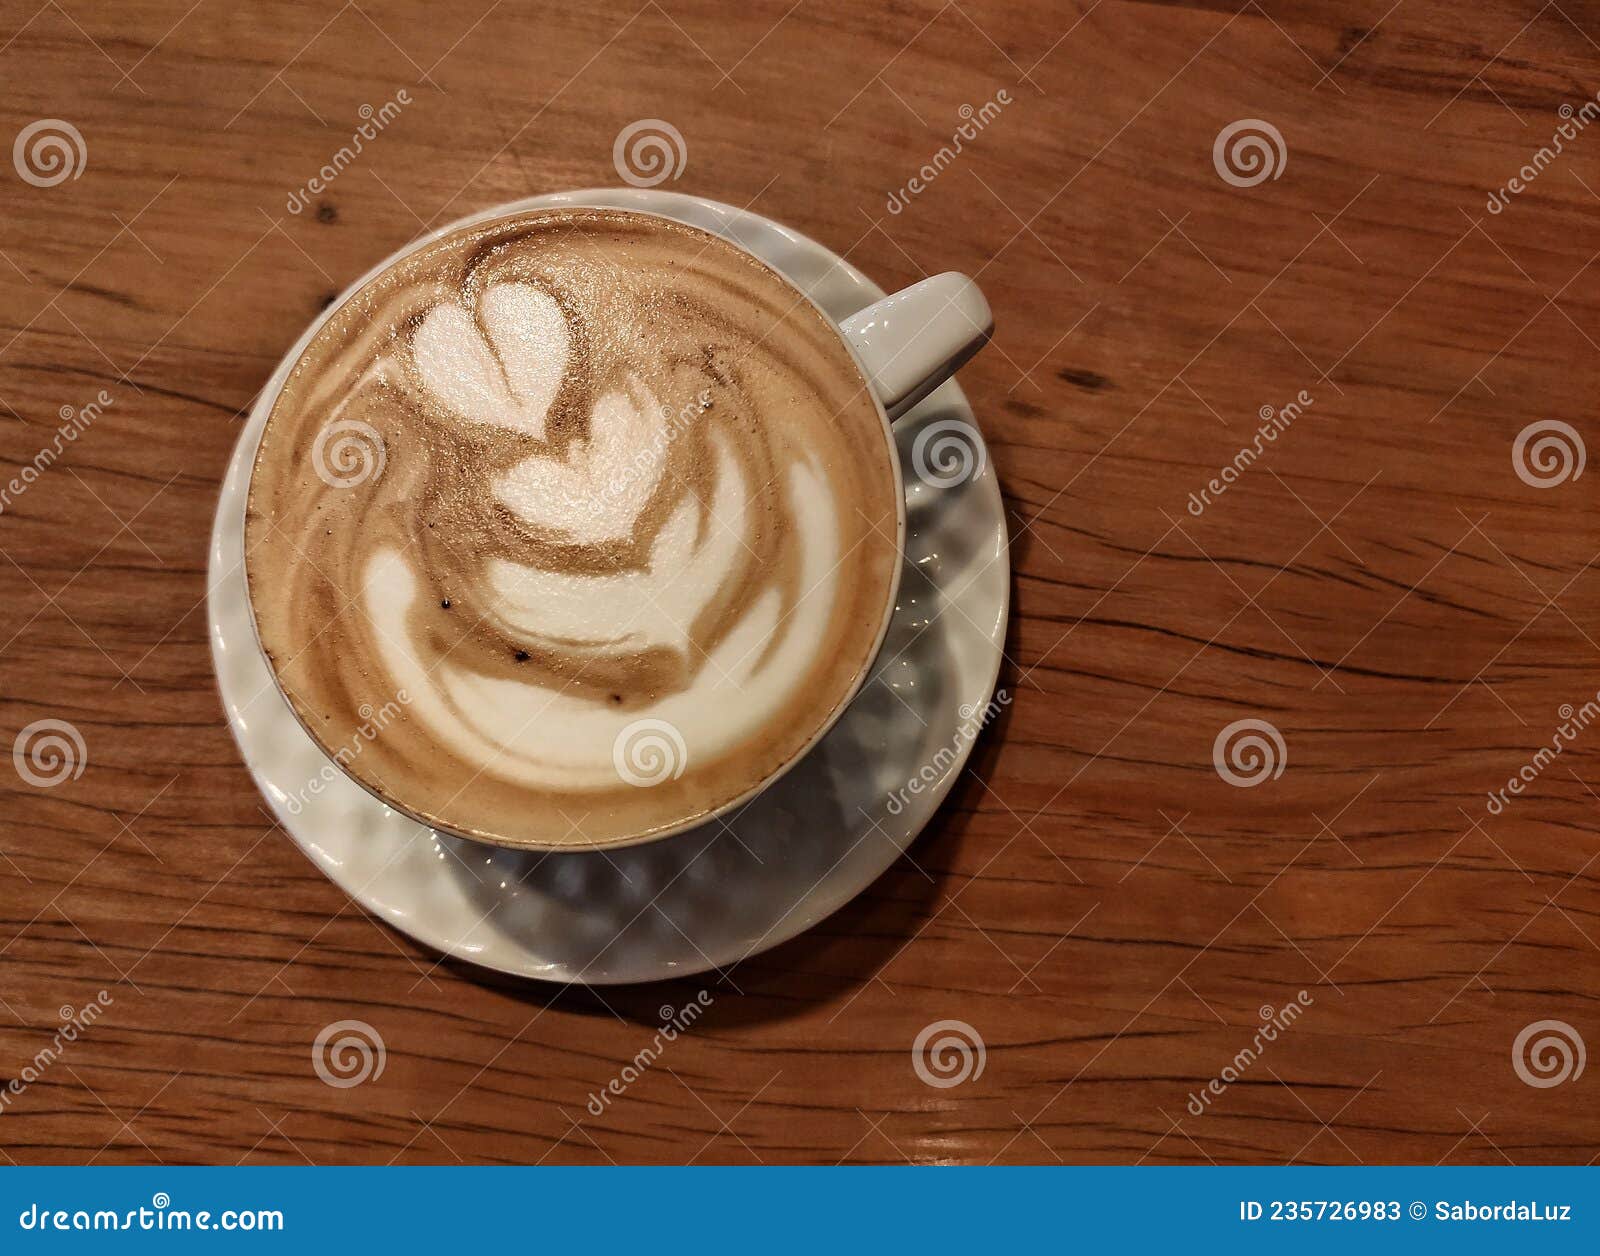 capuccino on a wood table and white cup